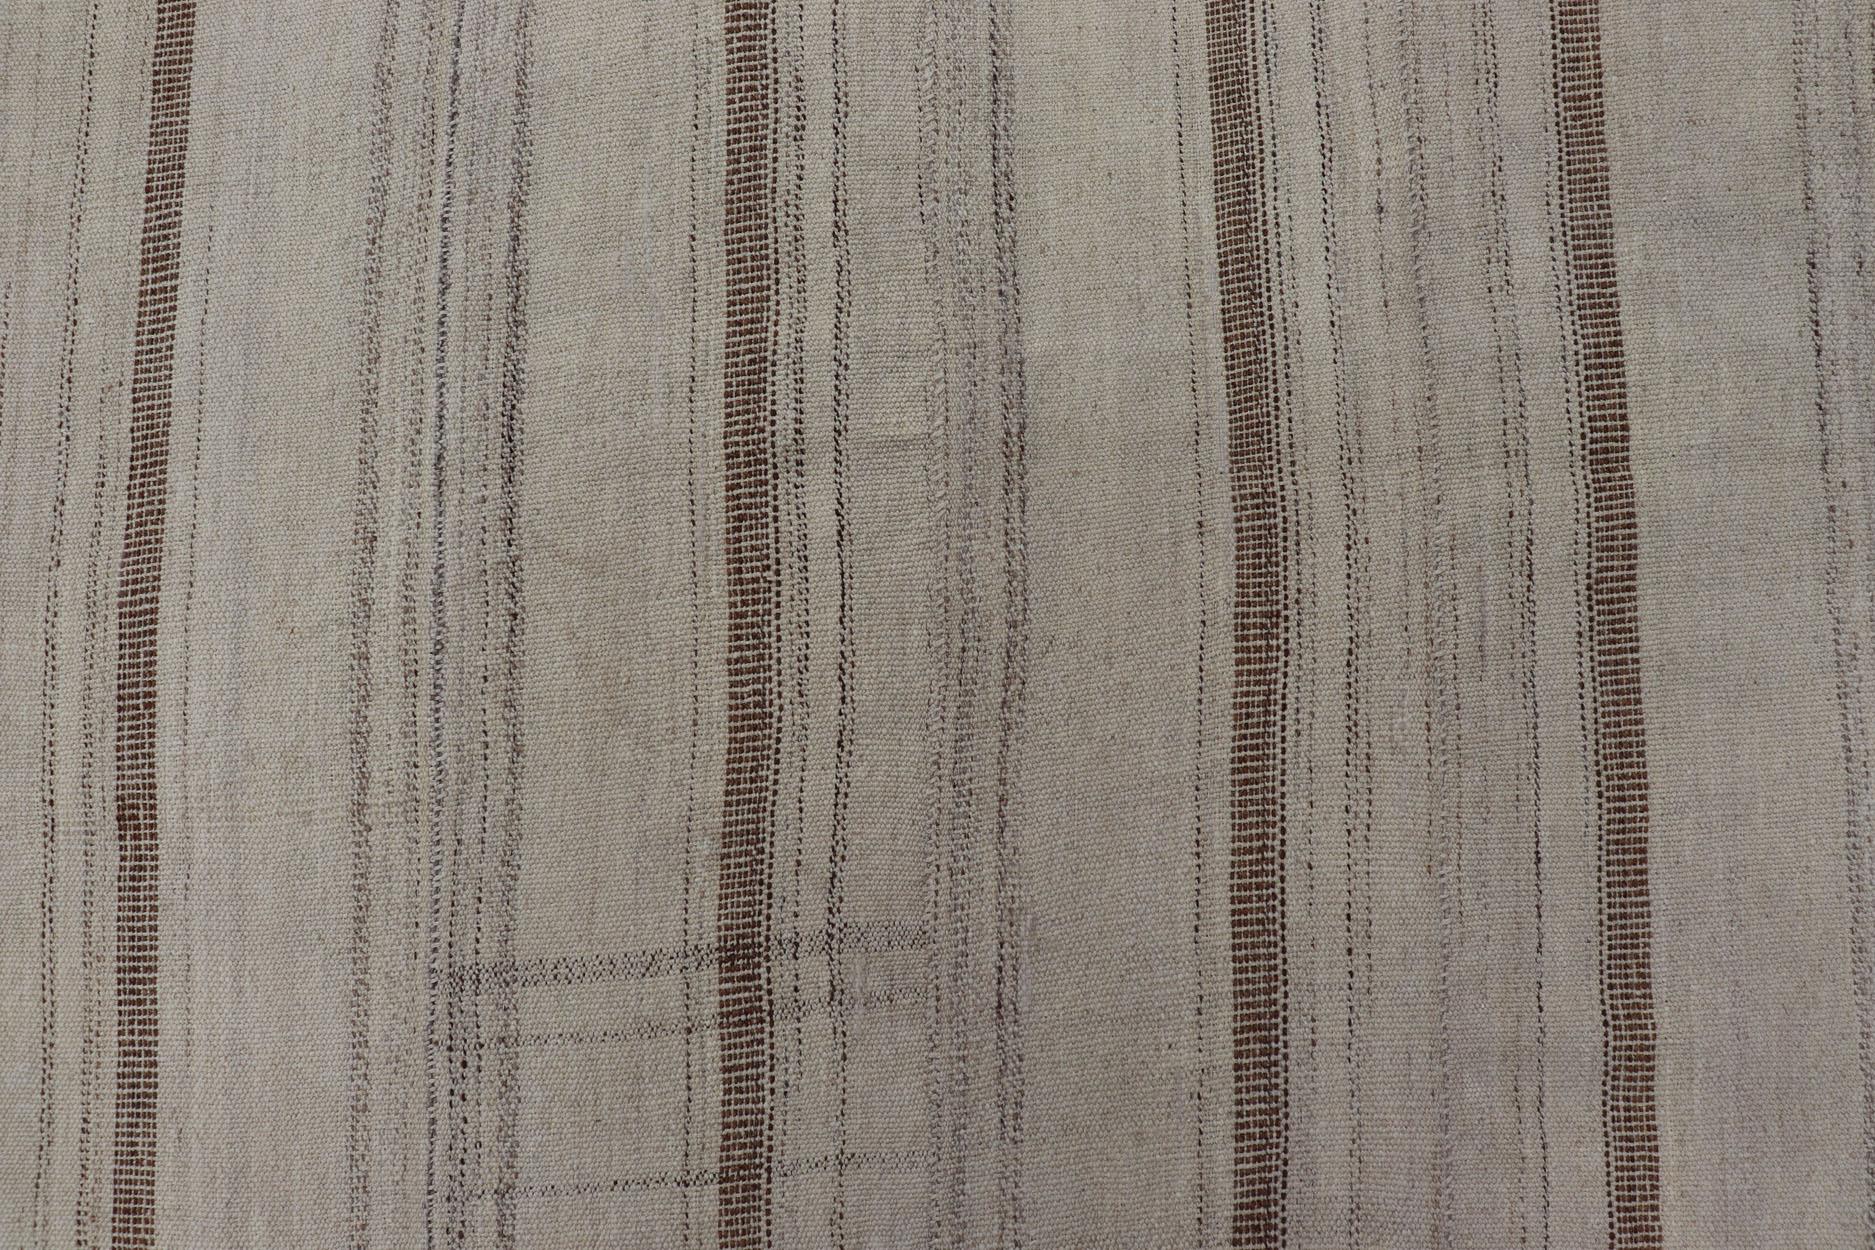 Vintage Hand Woven Turkish Kilim with Stripes in Taupe, Cream & Brown In Good Condition For Sale In Atlanta, GA